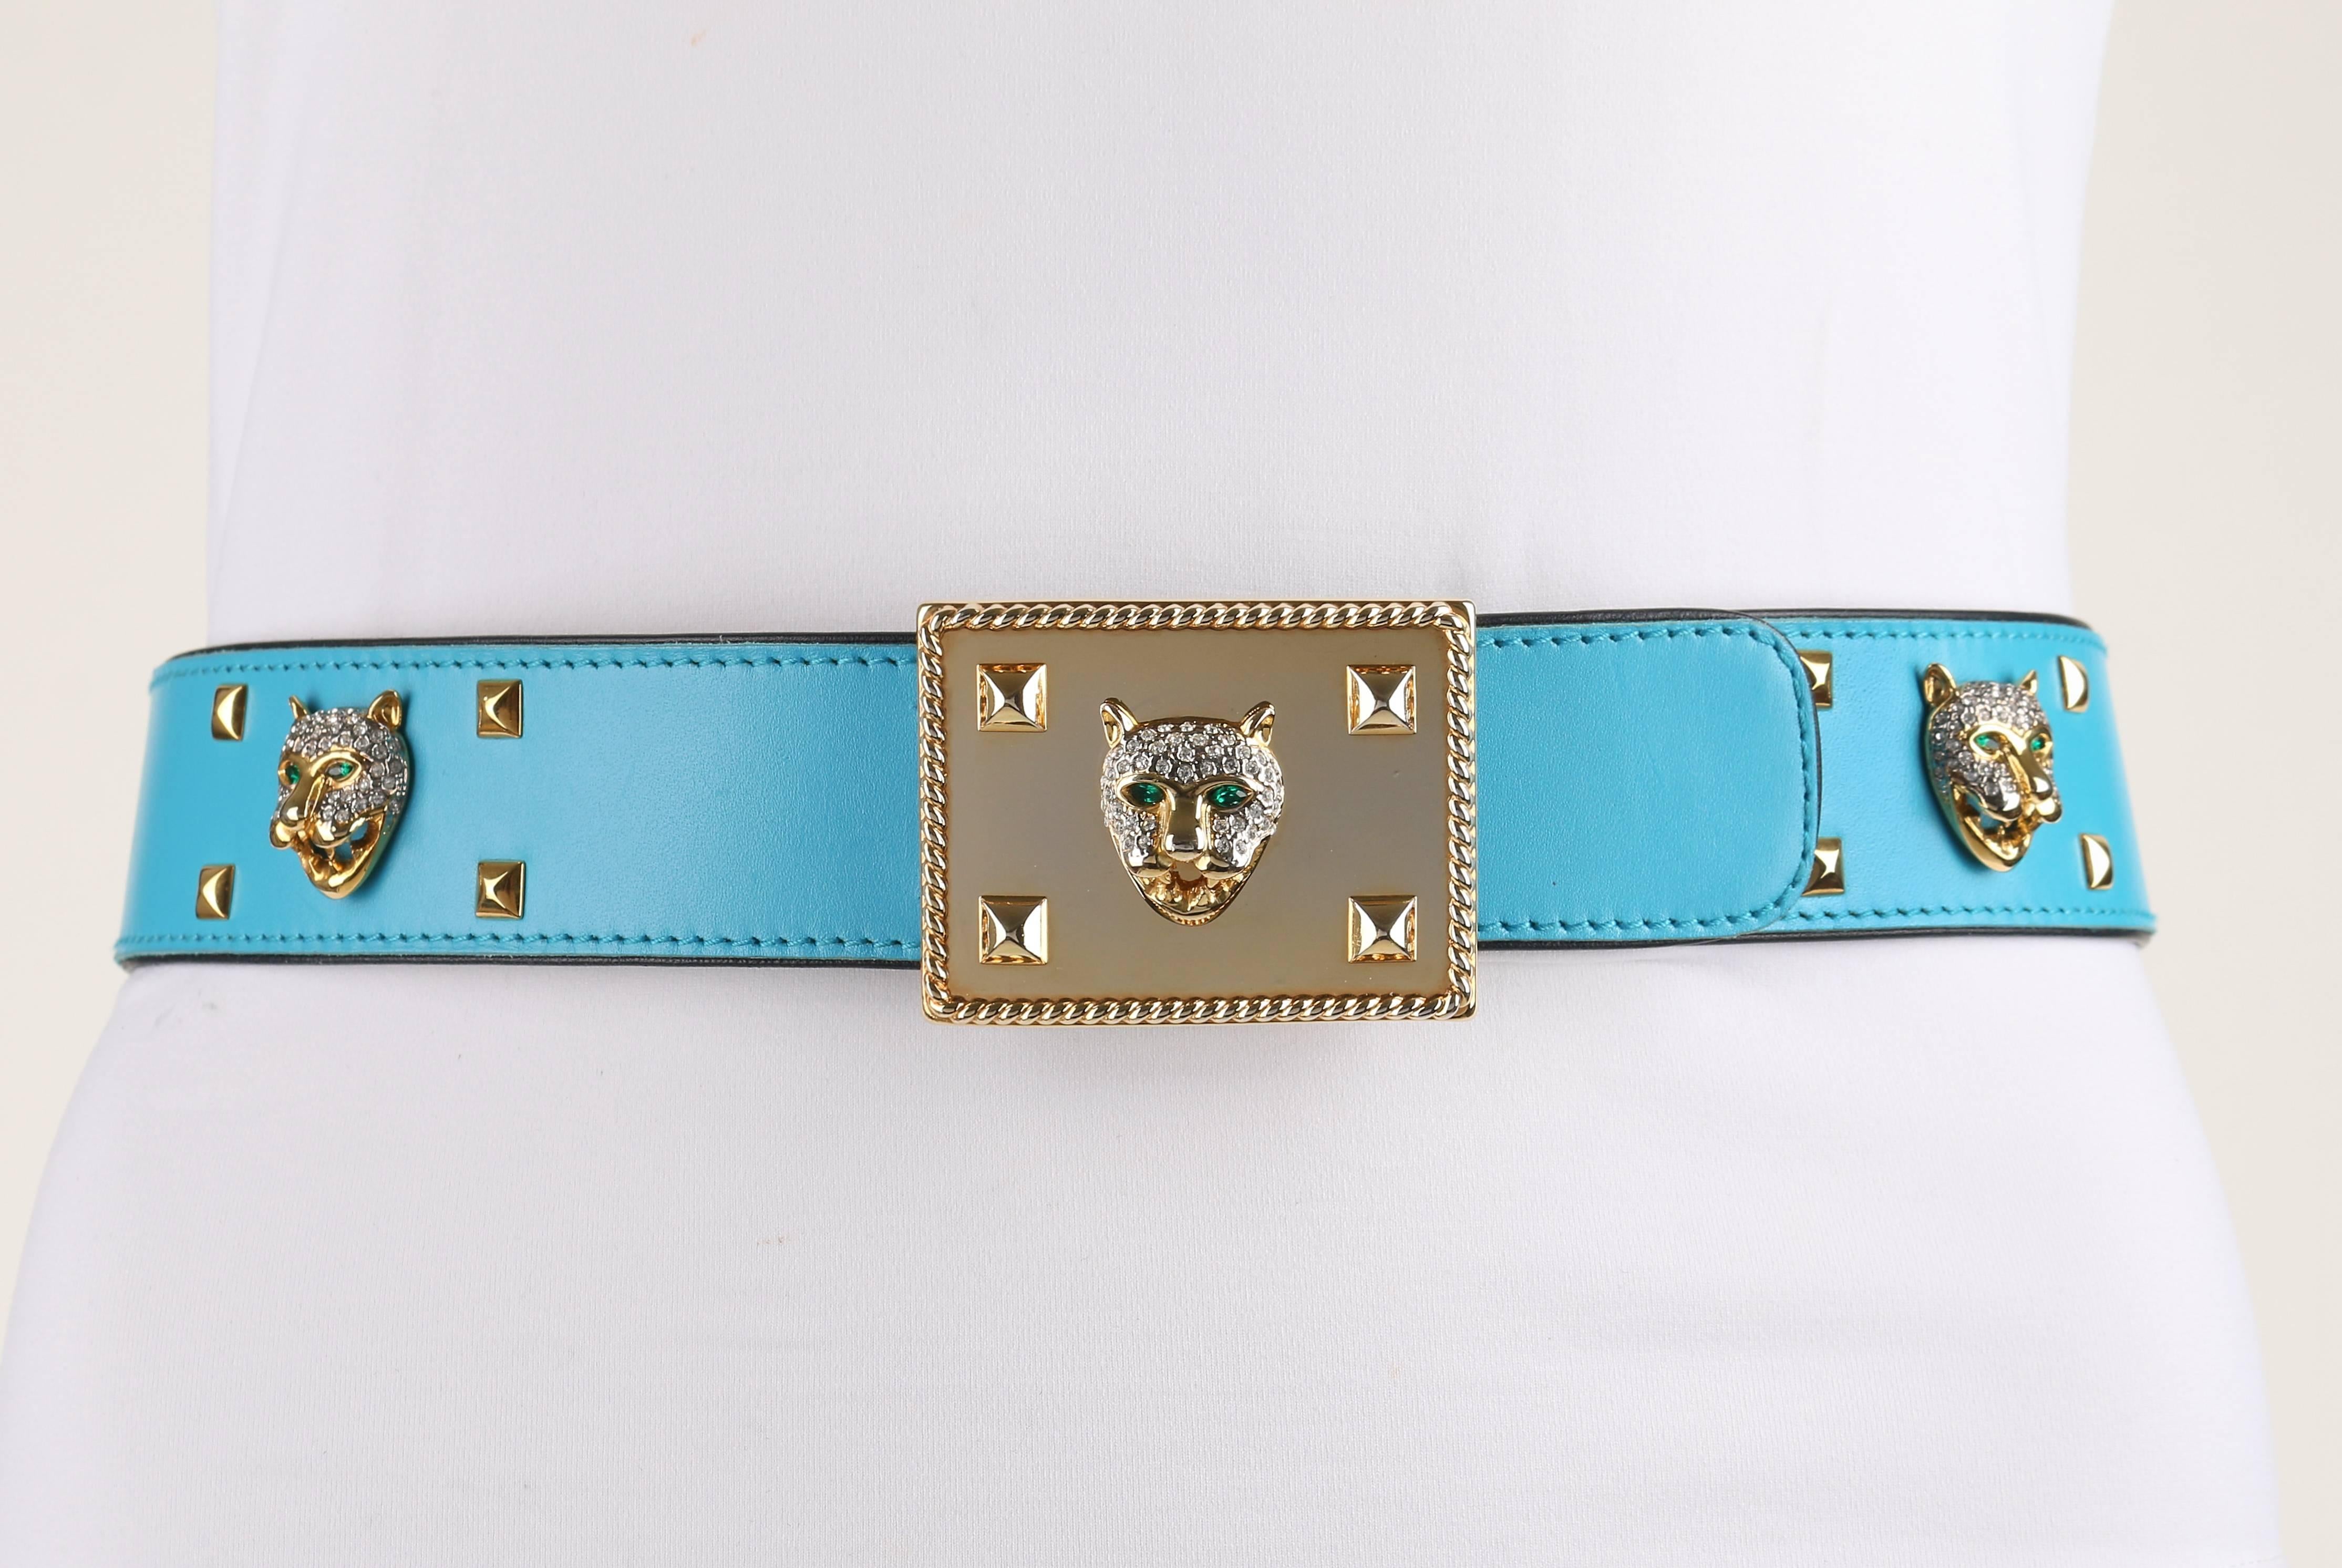 Vintage Escada c.1980's turquoise blue leather rhinestone jaguar studded belt. Turquoise leather body trimmed and backed in black leather. Embellished in gold-toned pyramid studs, jaguar heads with emerald toned eyes and rhinestone spots, and